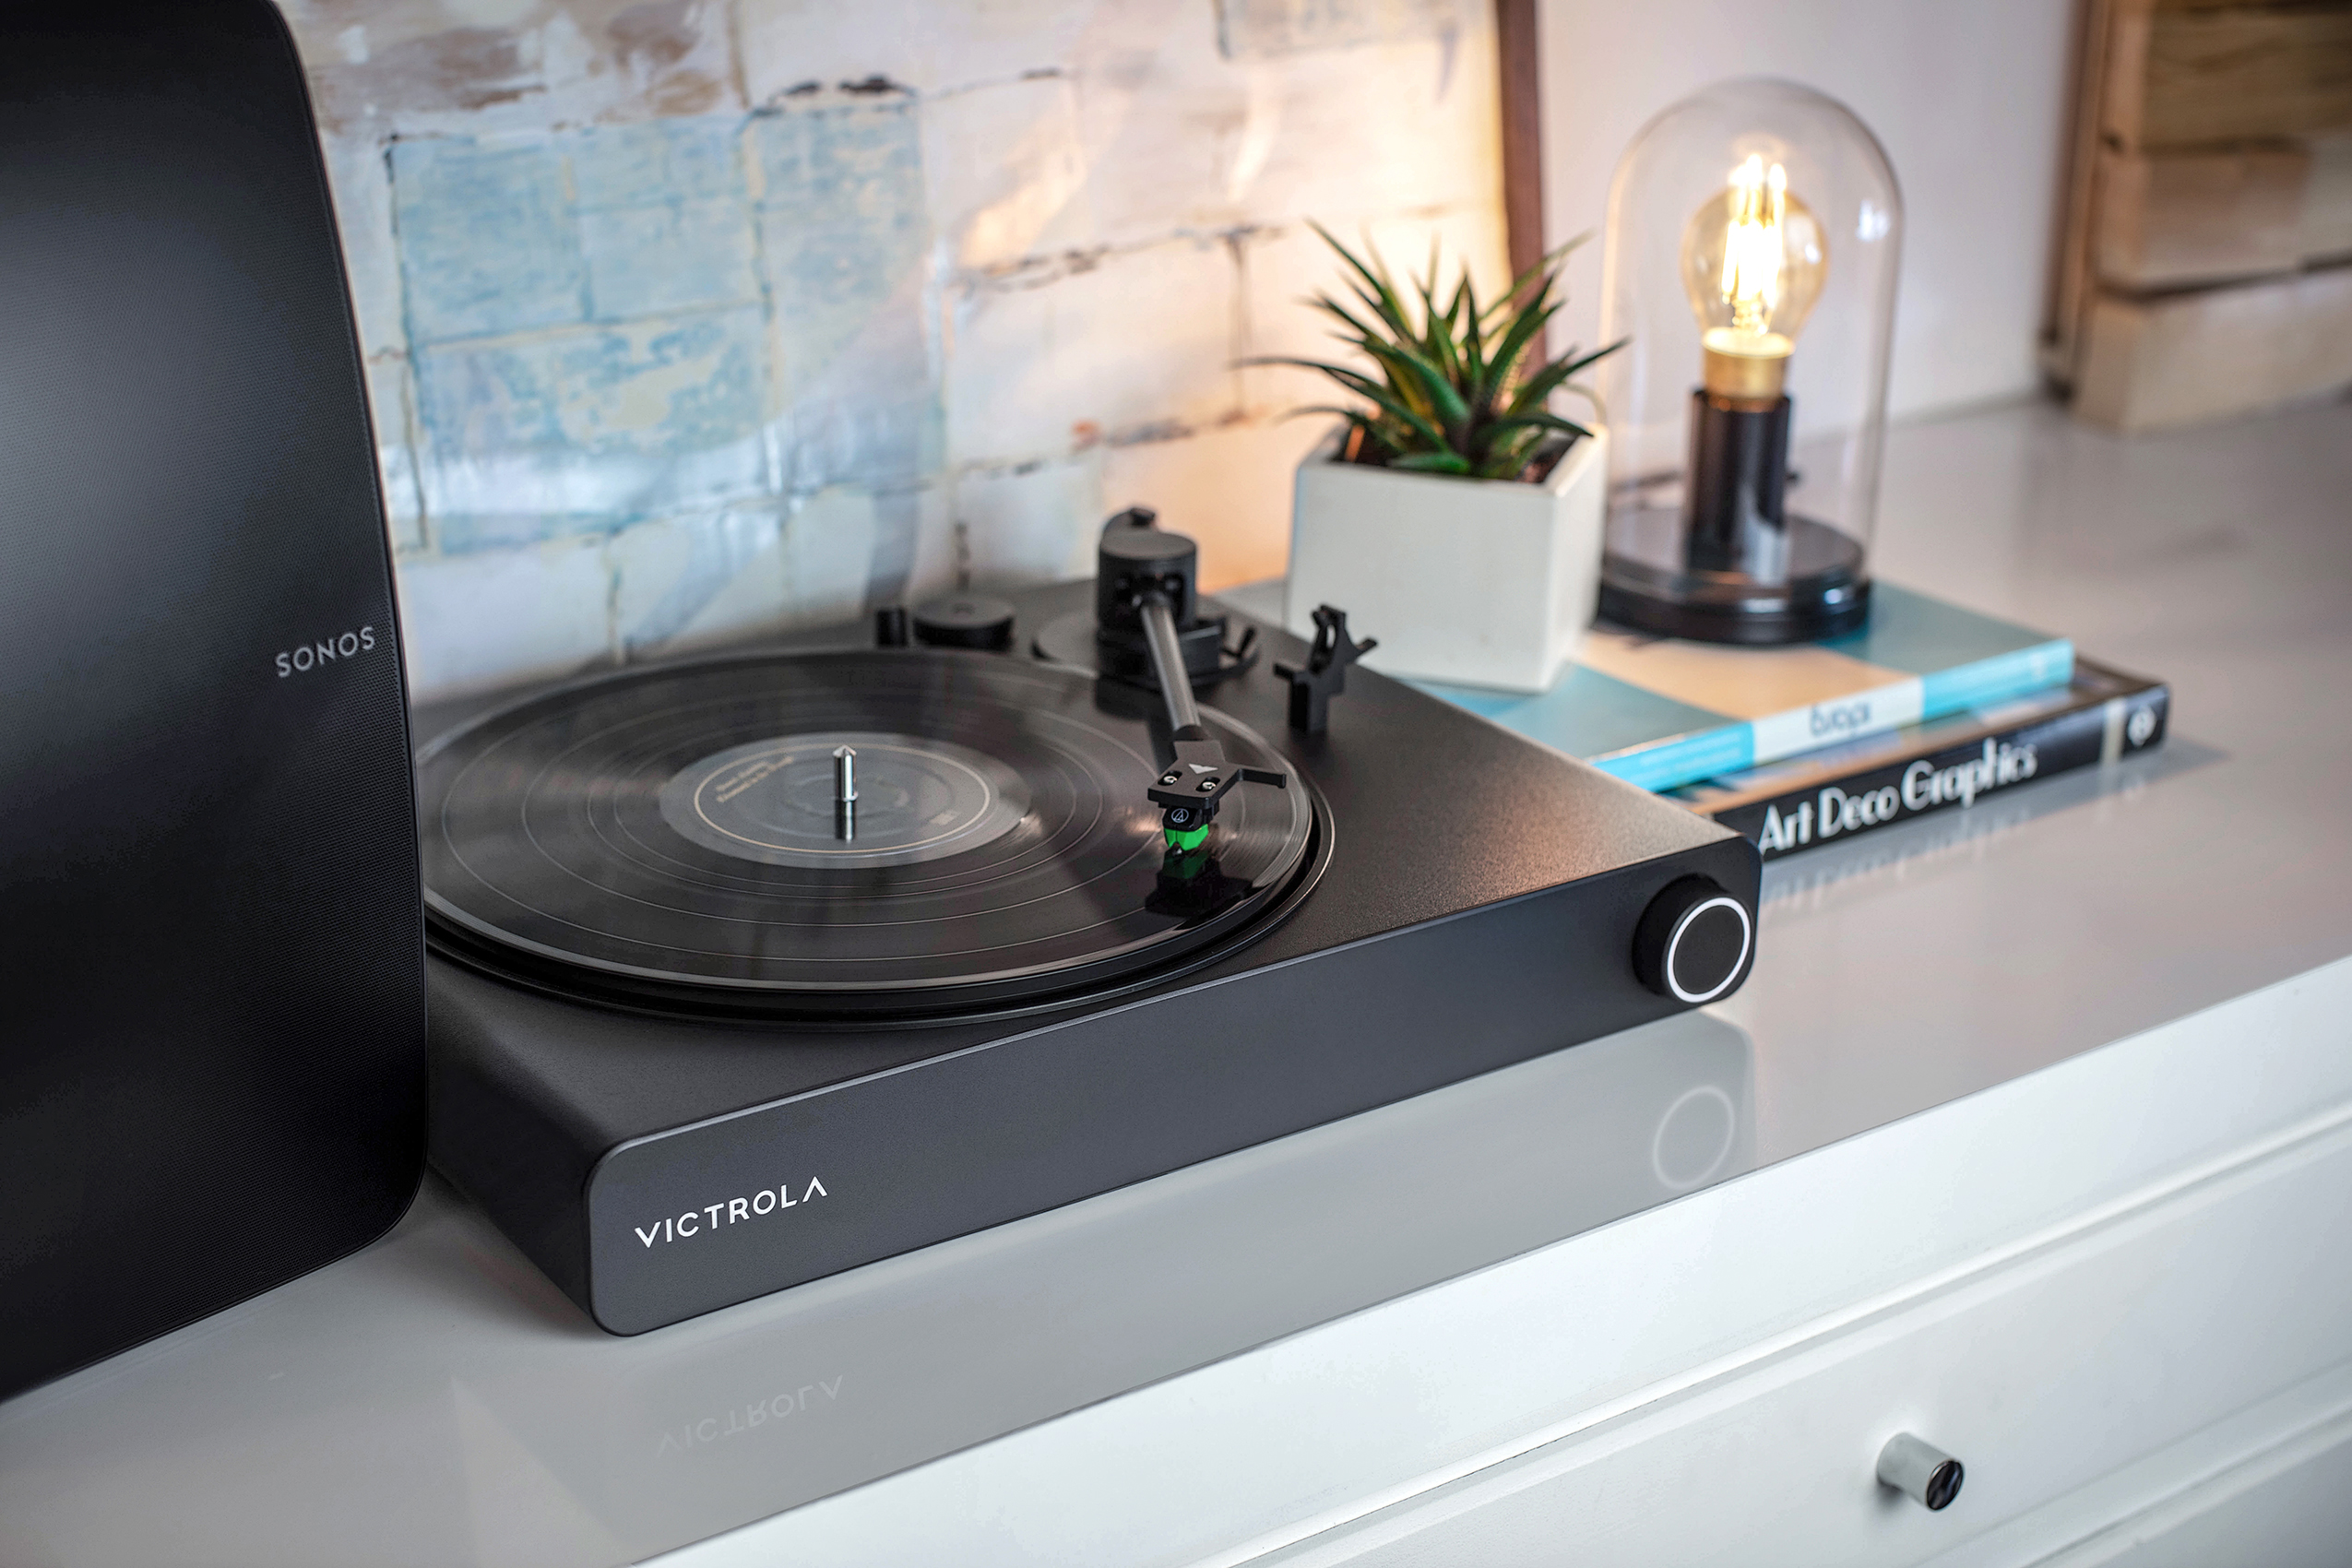 The Victrola Stream Onyx Sonos-ready turntable on a white cabinet.